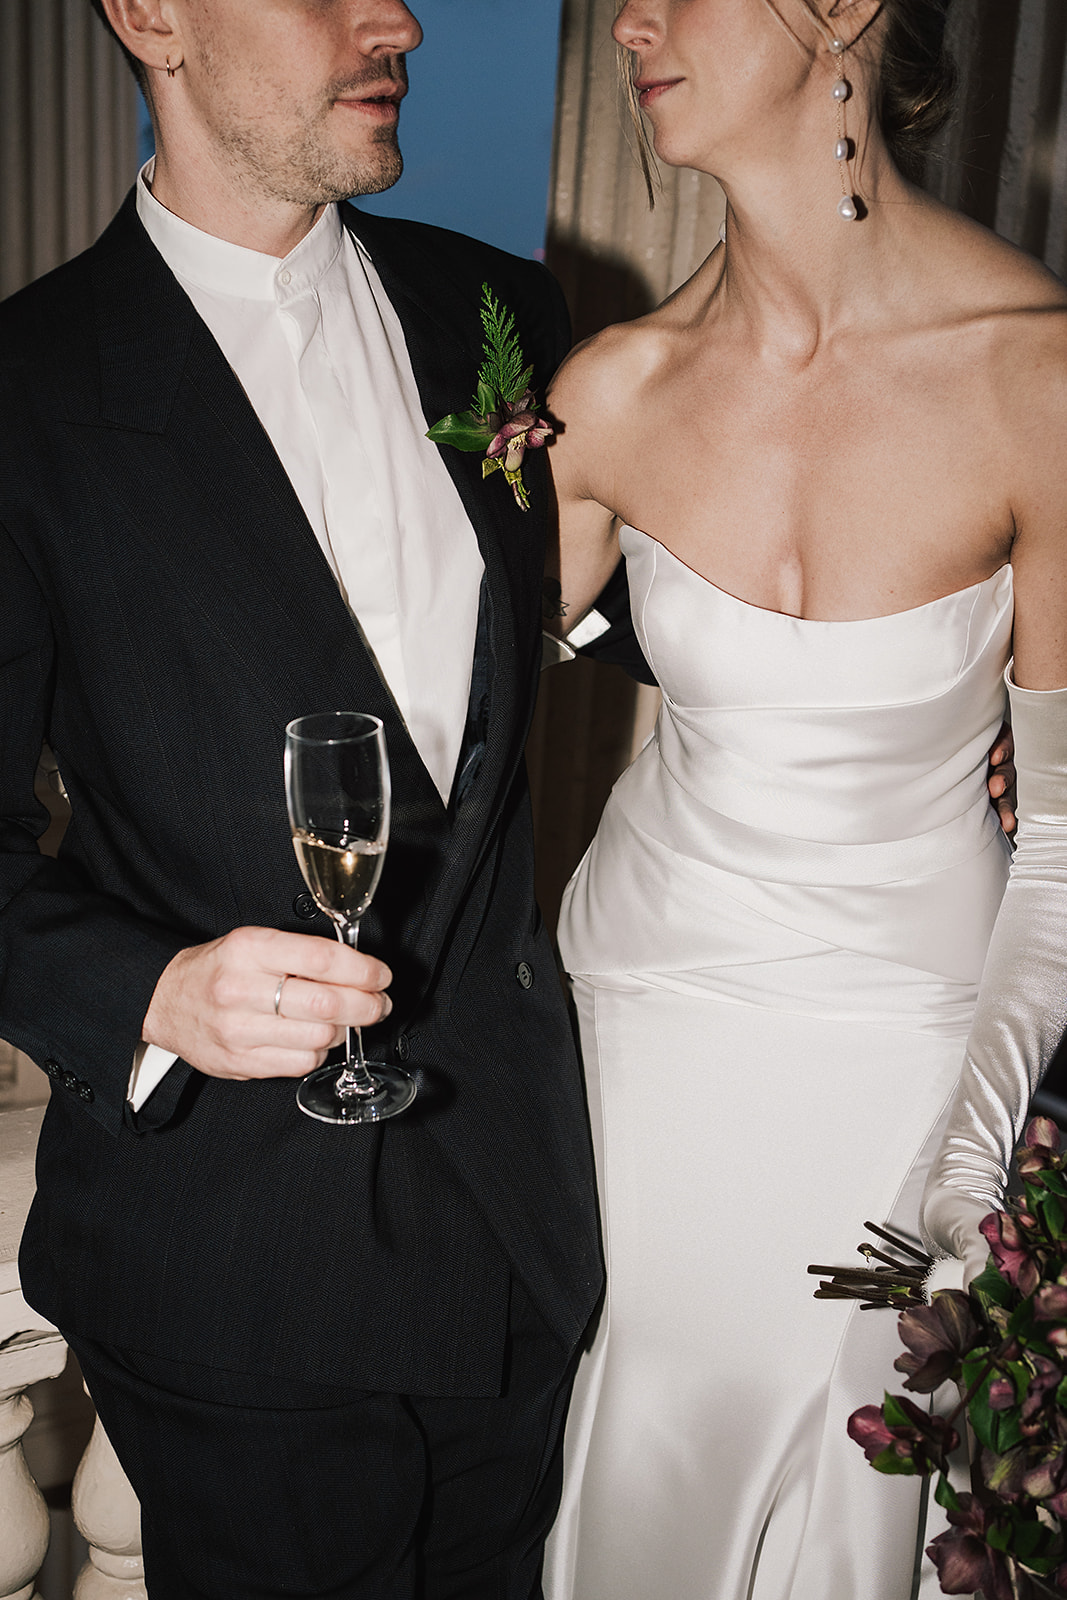 Glass of champagne during wedding portraits | Modern Wedding Photography by Lisa Jane Photography